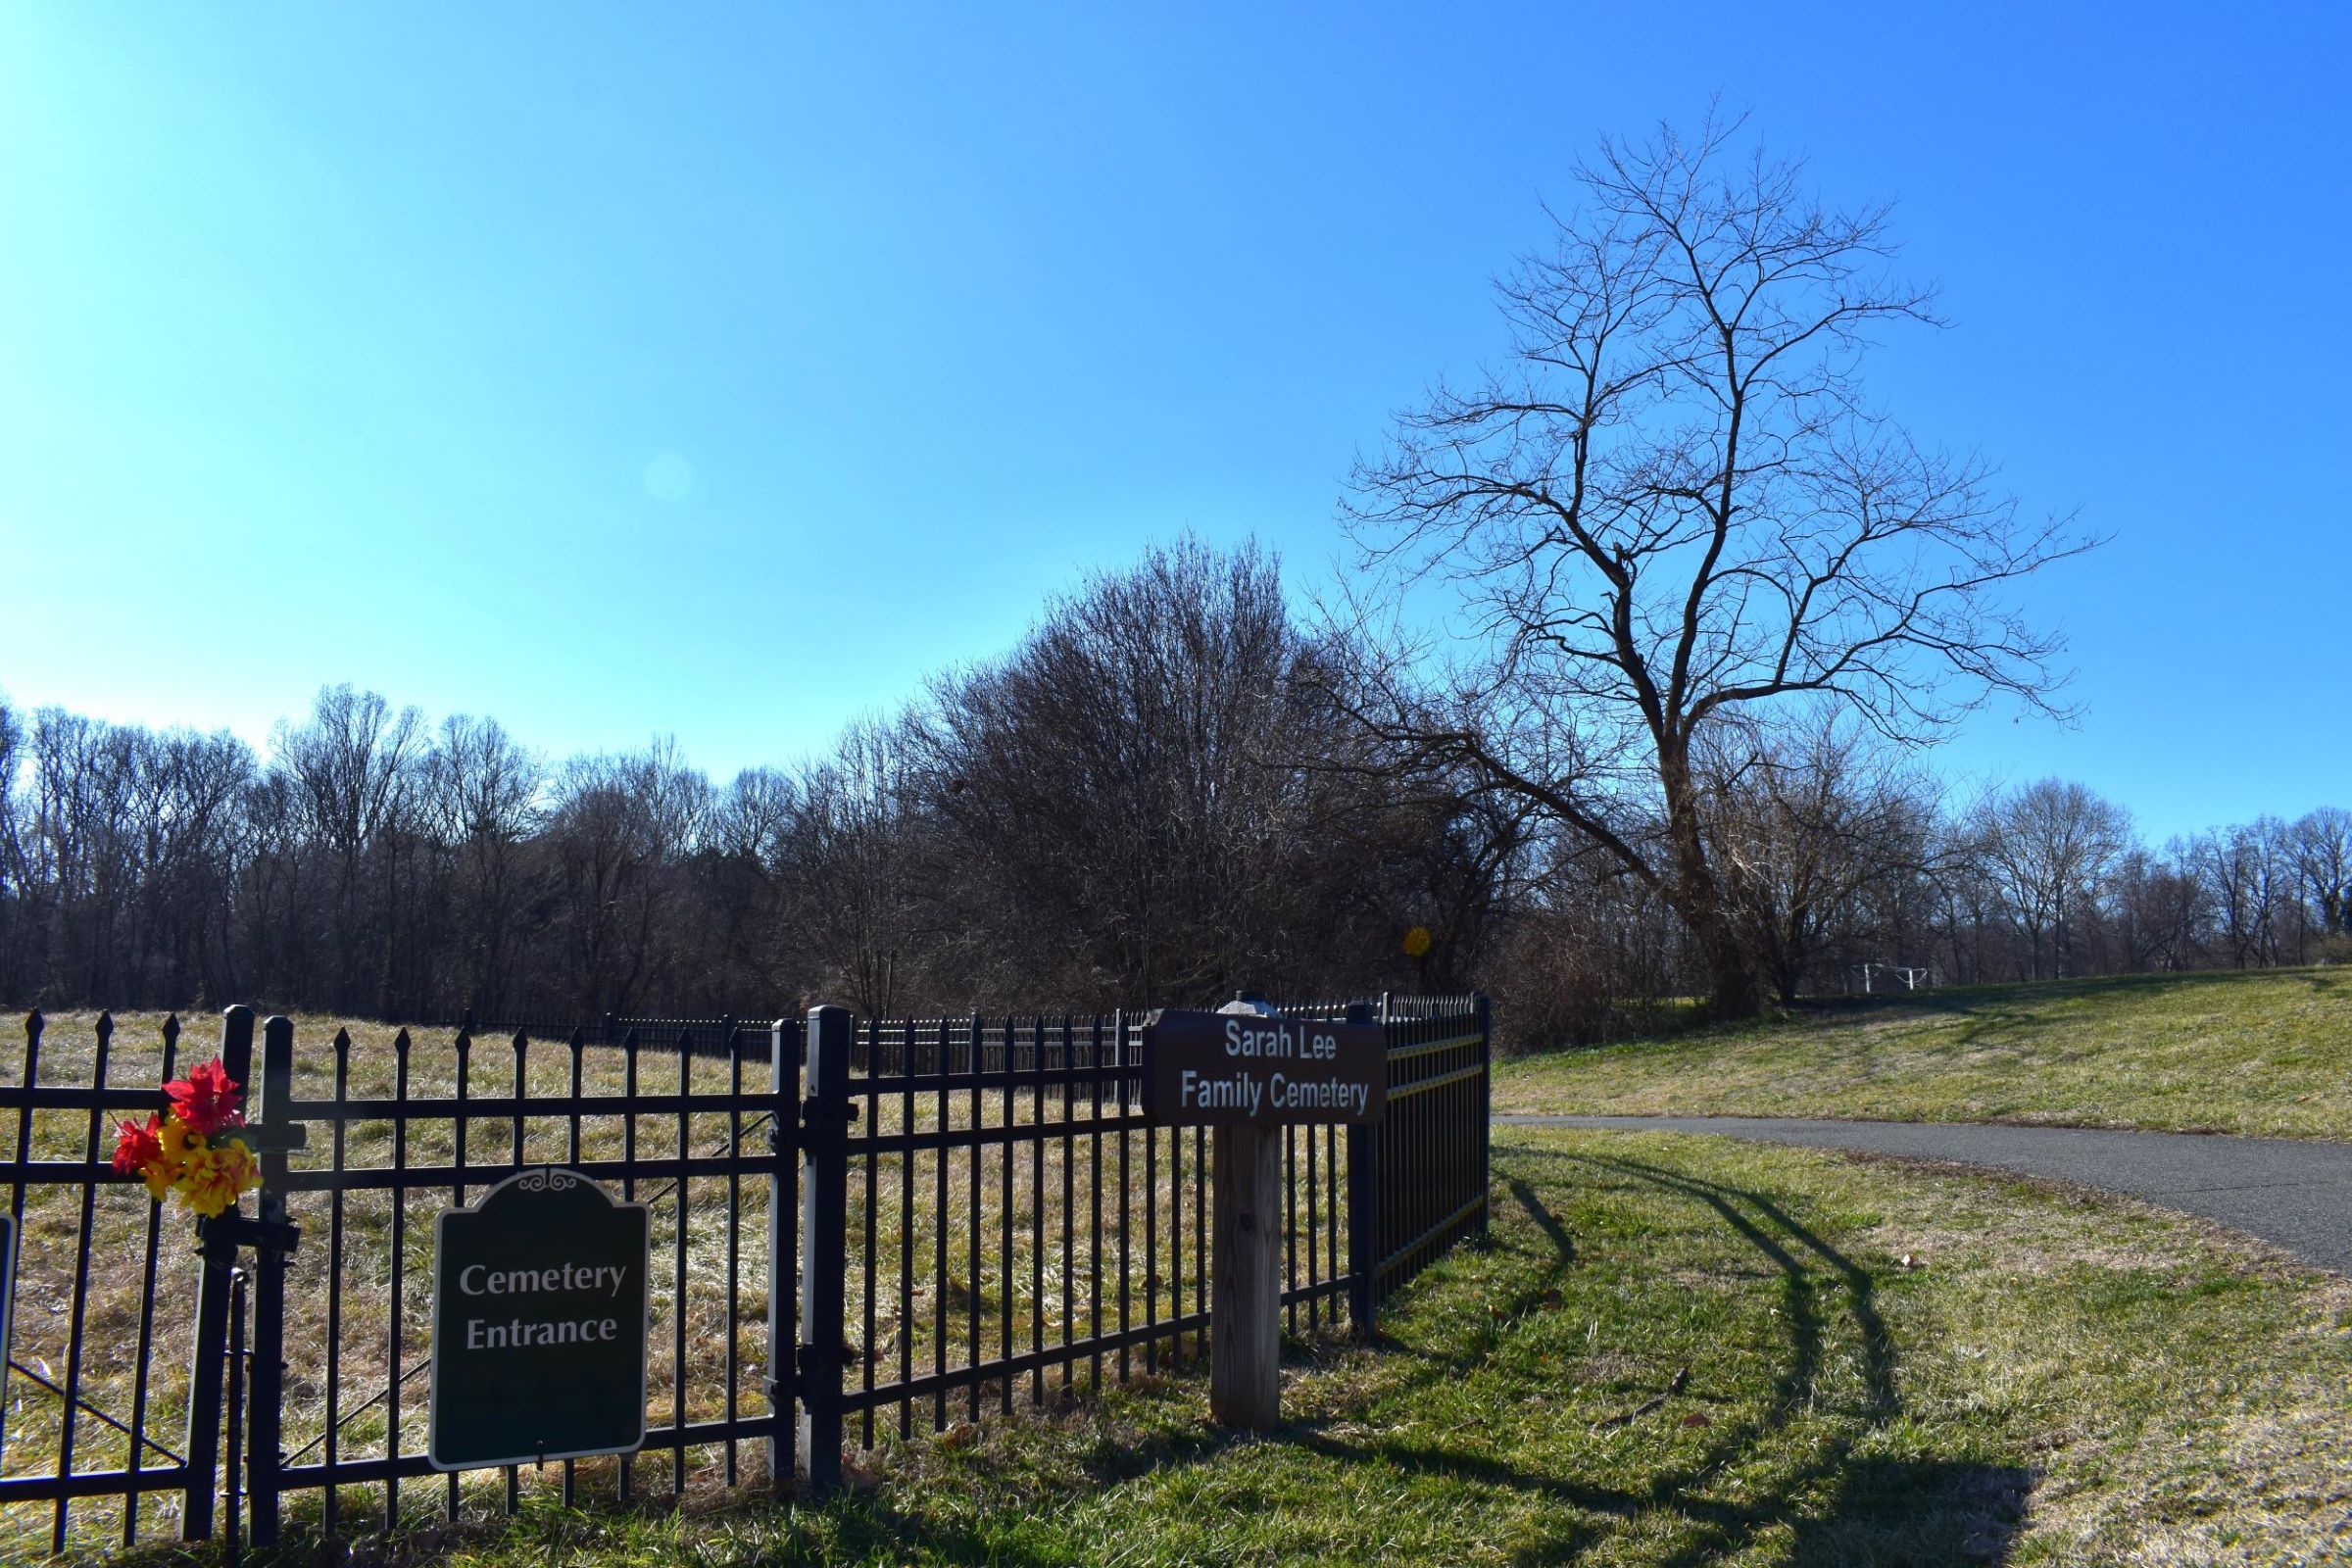 A metal fence surrounds a grassy area with a wooden sign posted in front that reads "Sarah Lee Family Cemetery." A walking path and stand of trees are to the right.